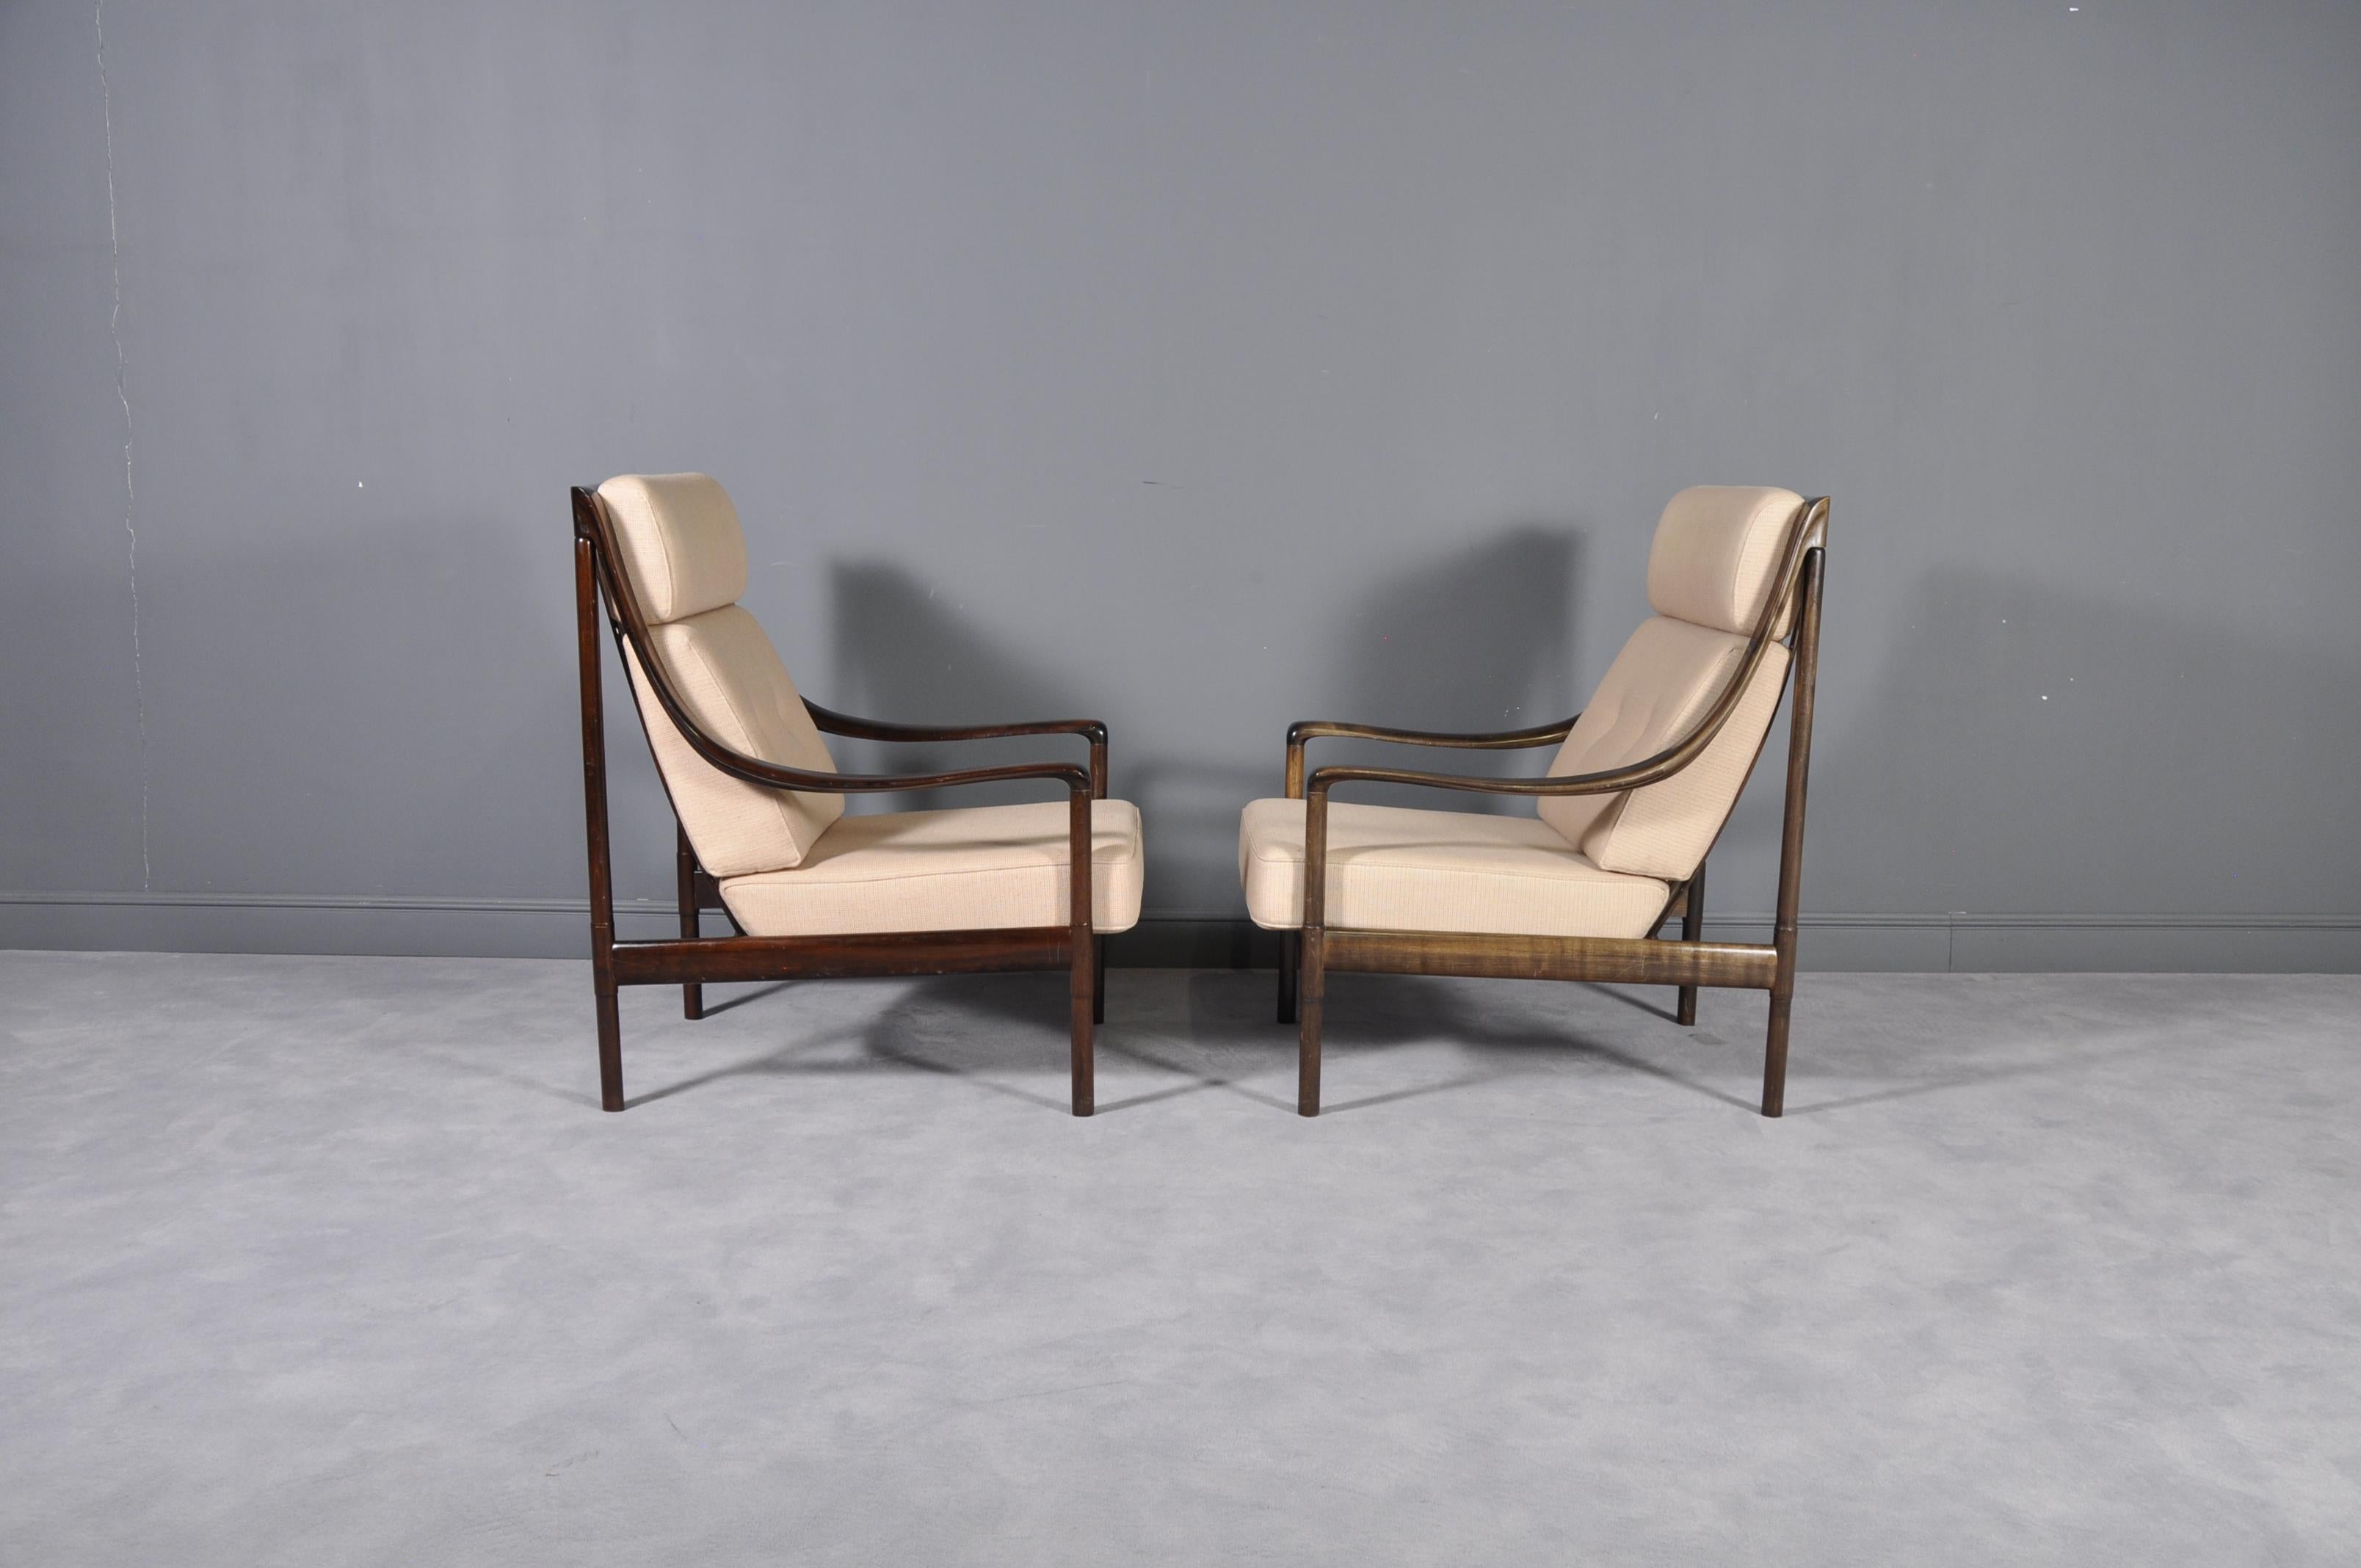 These chairs were designed by Walter Knoll in the early 1960s.